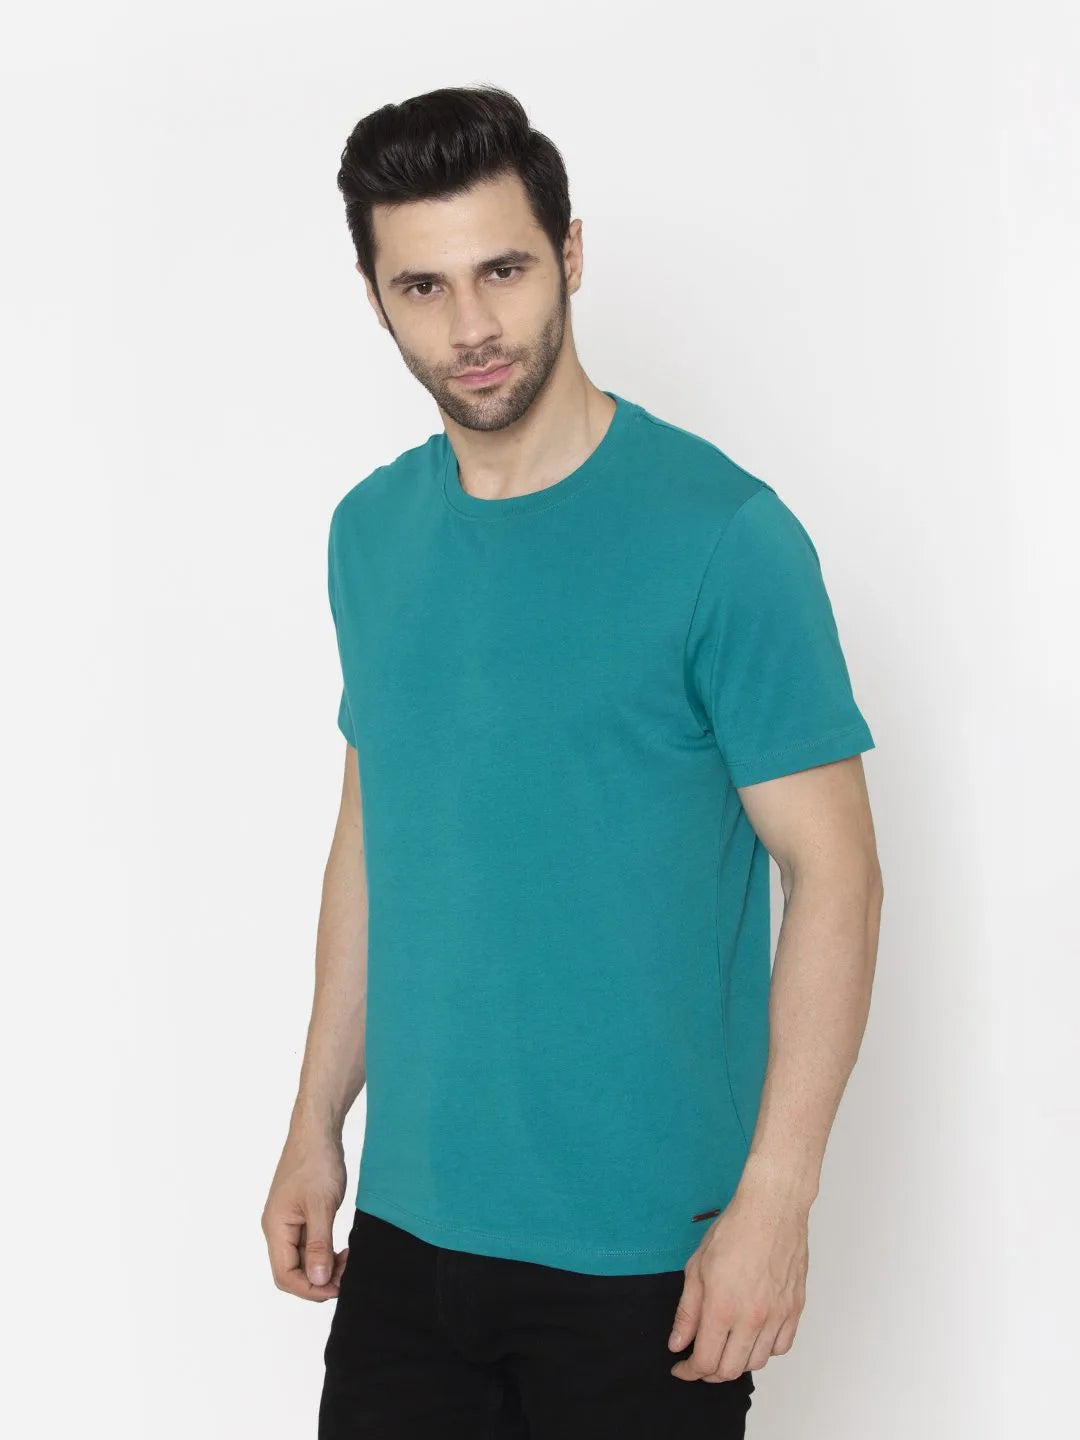 Flawless Men's Aquarius Cotton T-shirt | FRIDAY Being Flawless